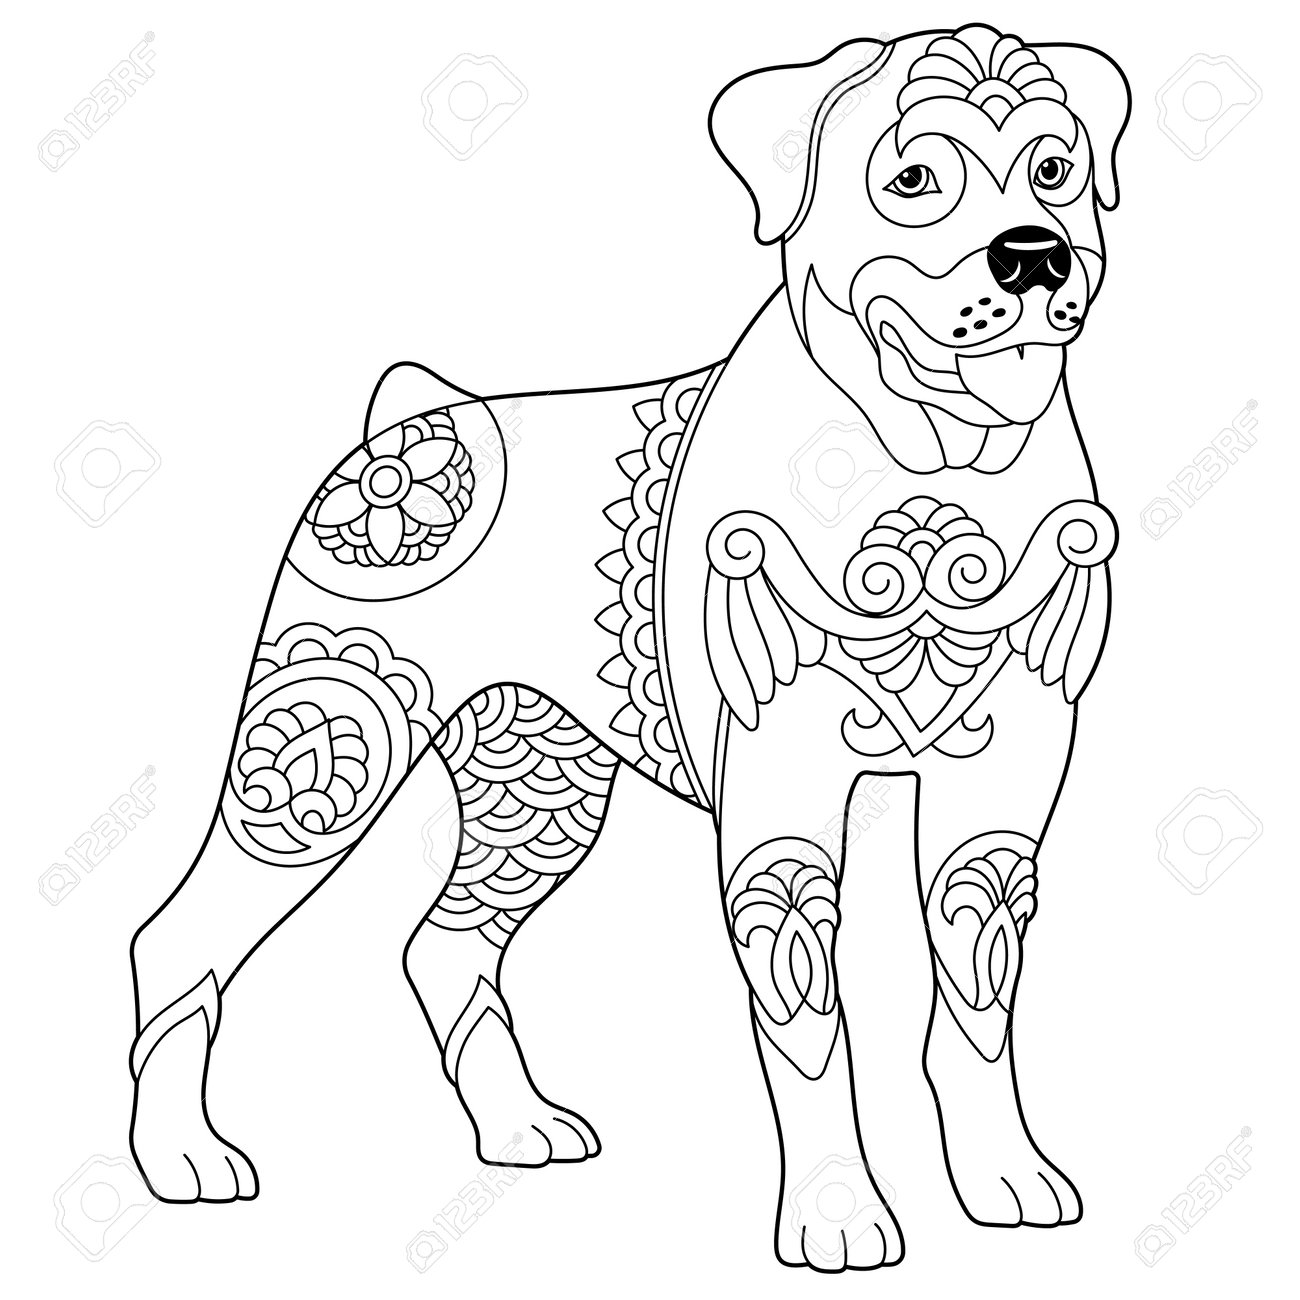 Cute rottweiler dog adult coloring book page in mandala style royalty free svg cliparts vectors and stock illustration image